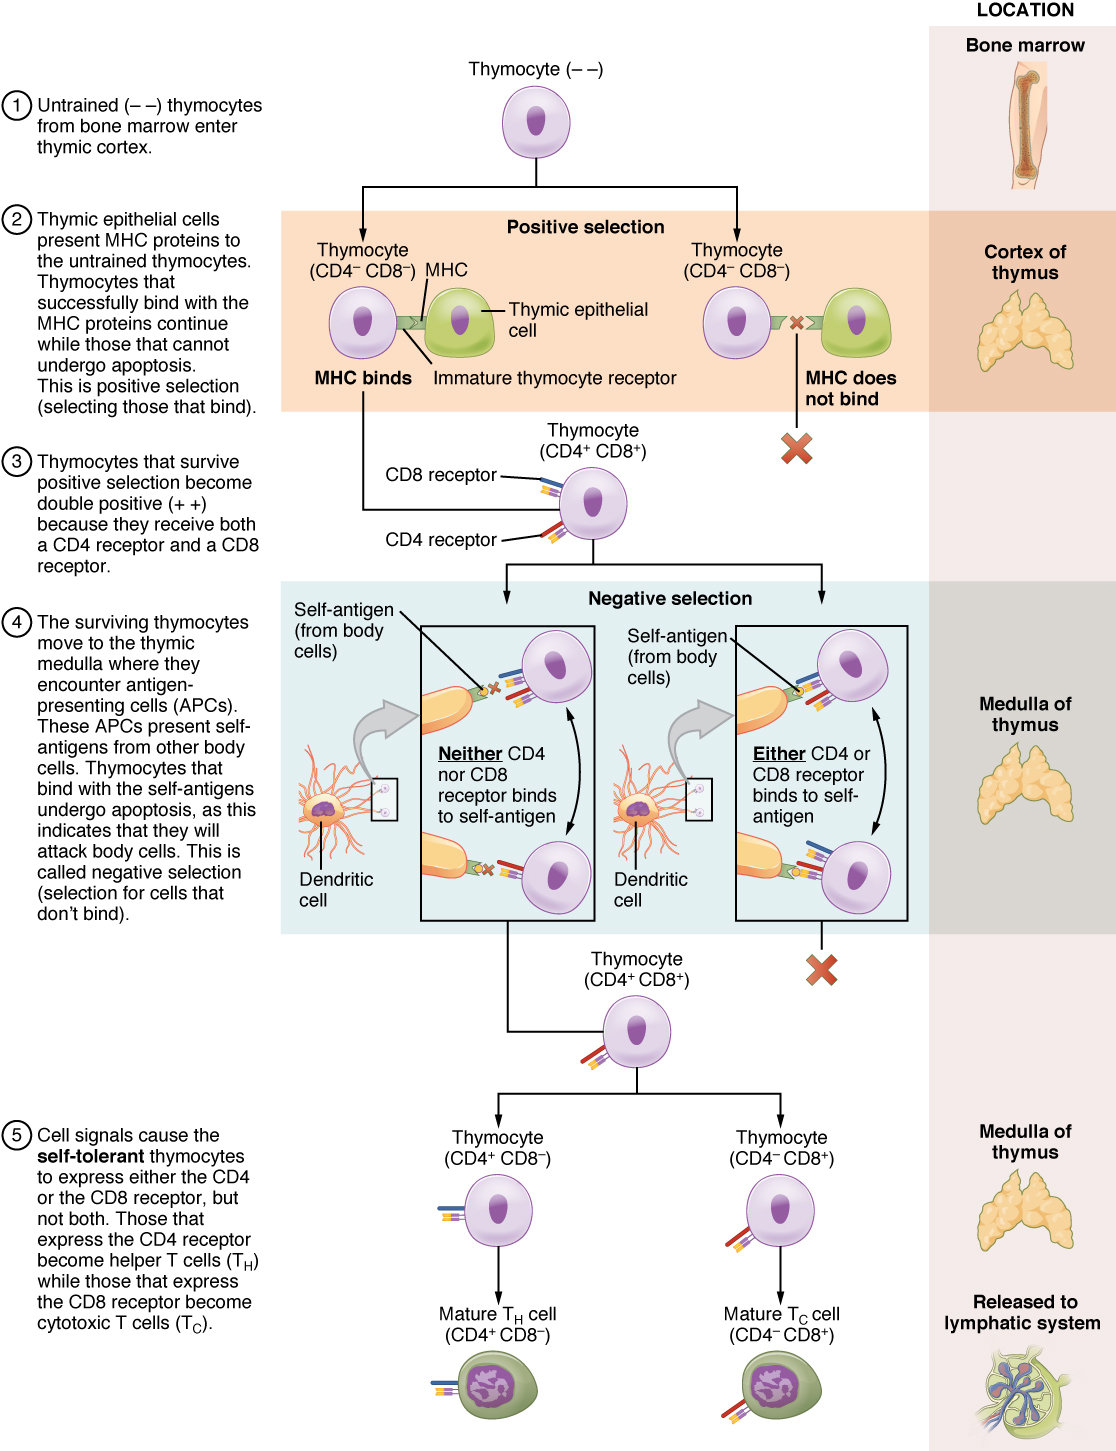 This multipart figure shows the different steps in the differentiation of a thymocyte into T cells. For each step of the process, accompanying text details the steps in the process. The right panel of this image shows the location of the different steps in the process.